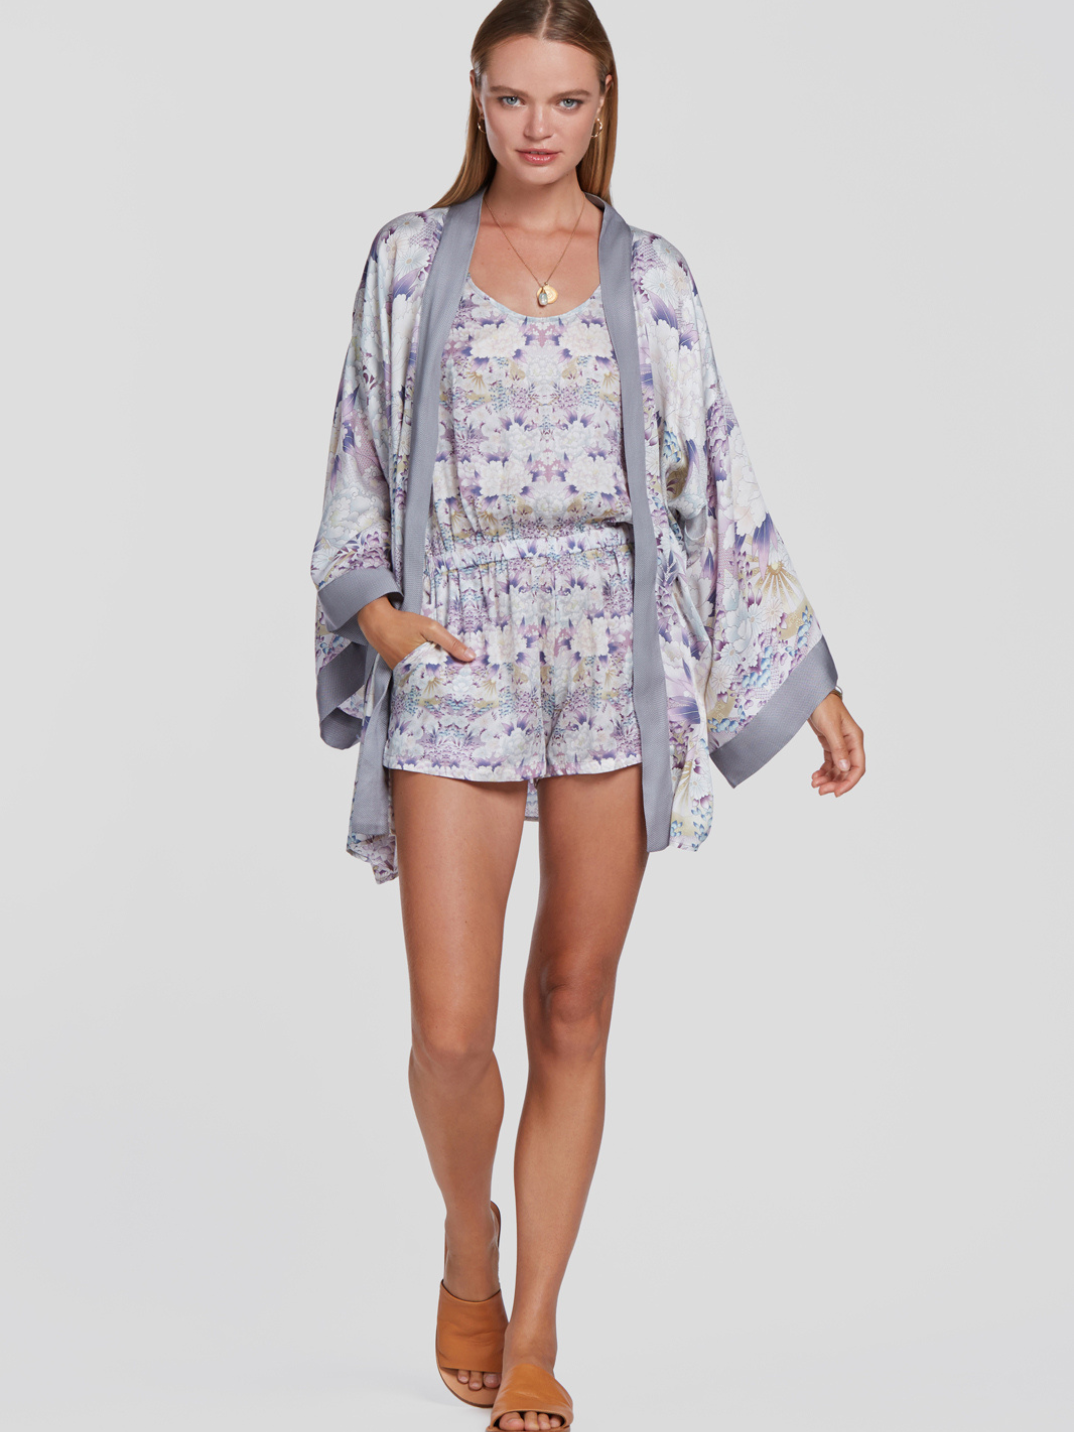 soft eco-friendly women's playsuit romper on sale discounted sustainable fashion made in Bali trendy fashion for women